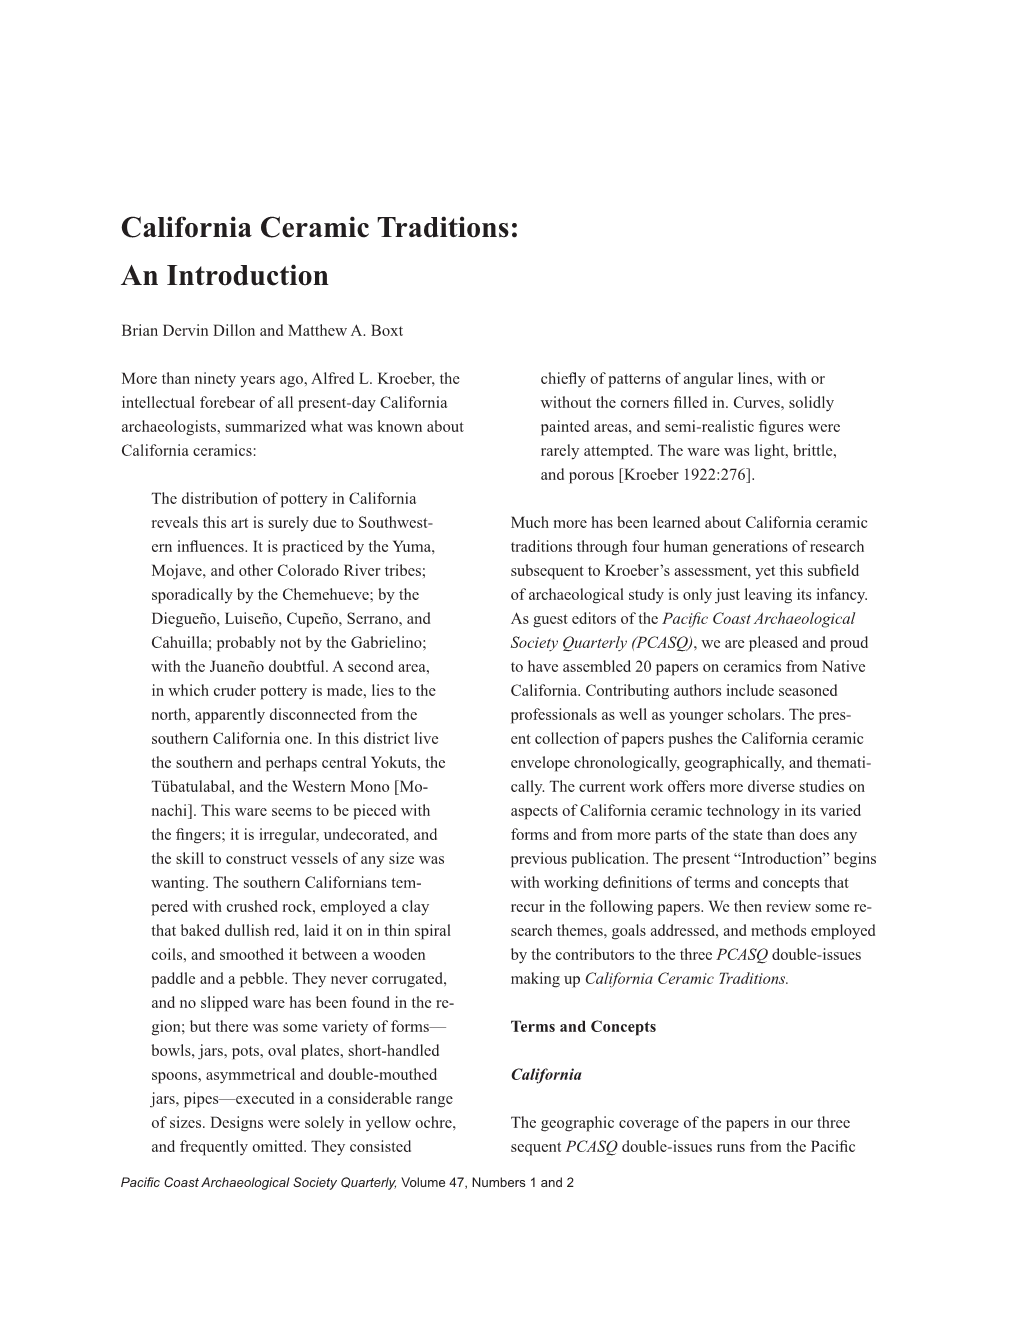 California Ceramic Traditions: an Introduction